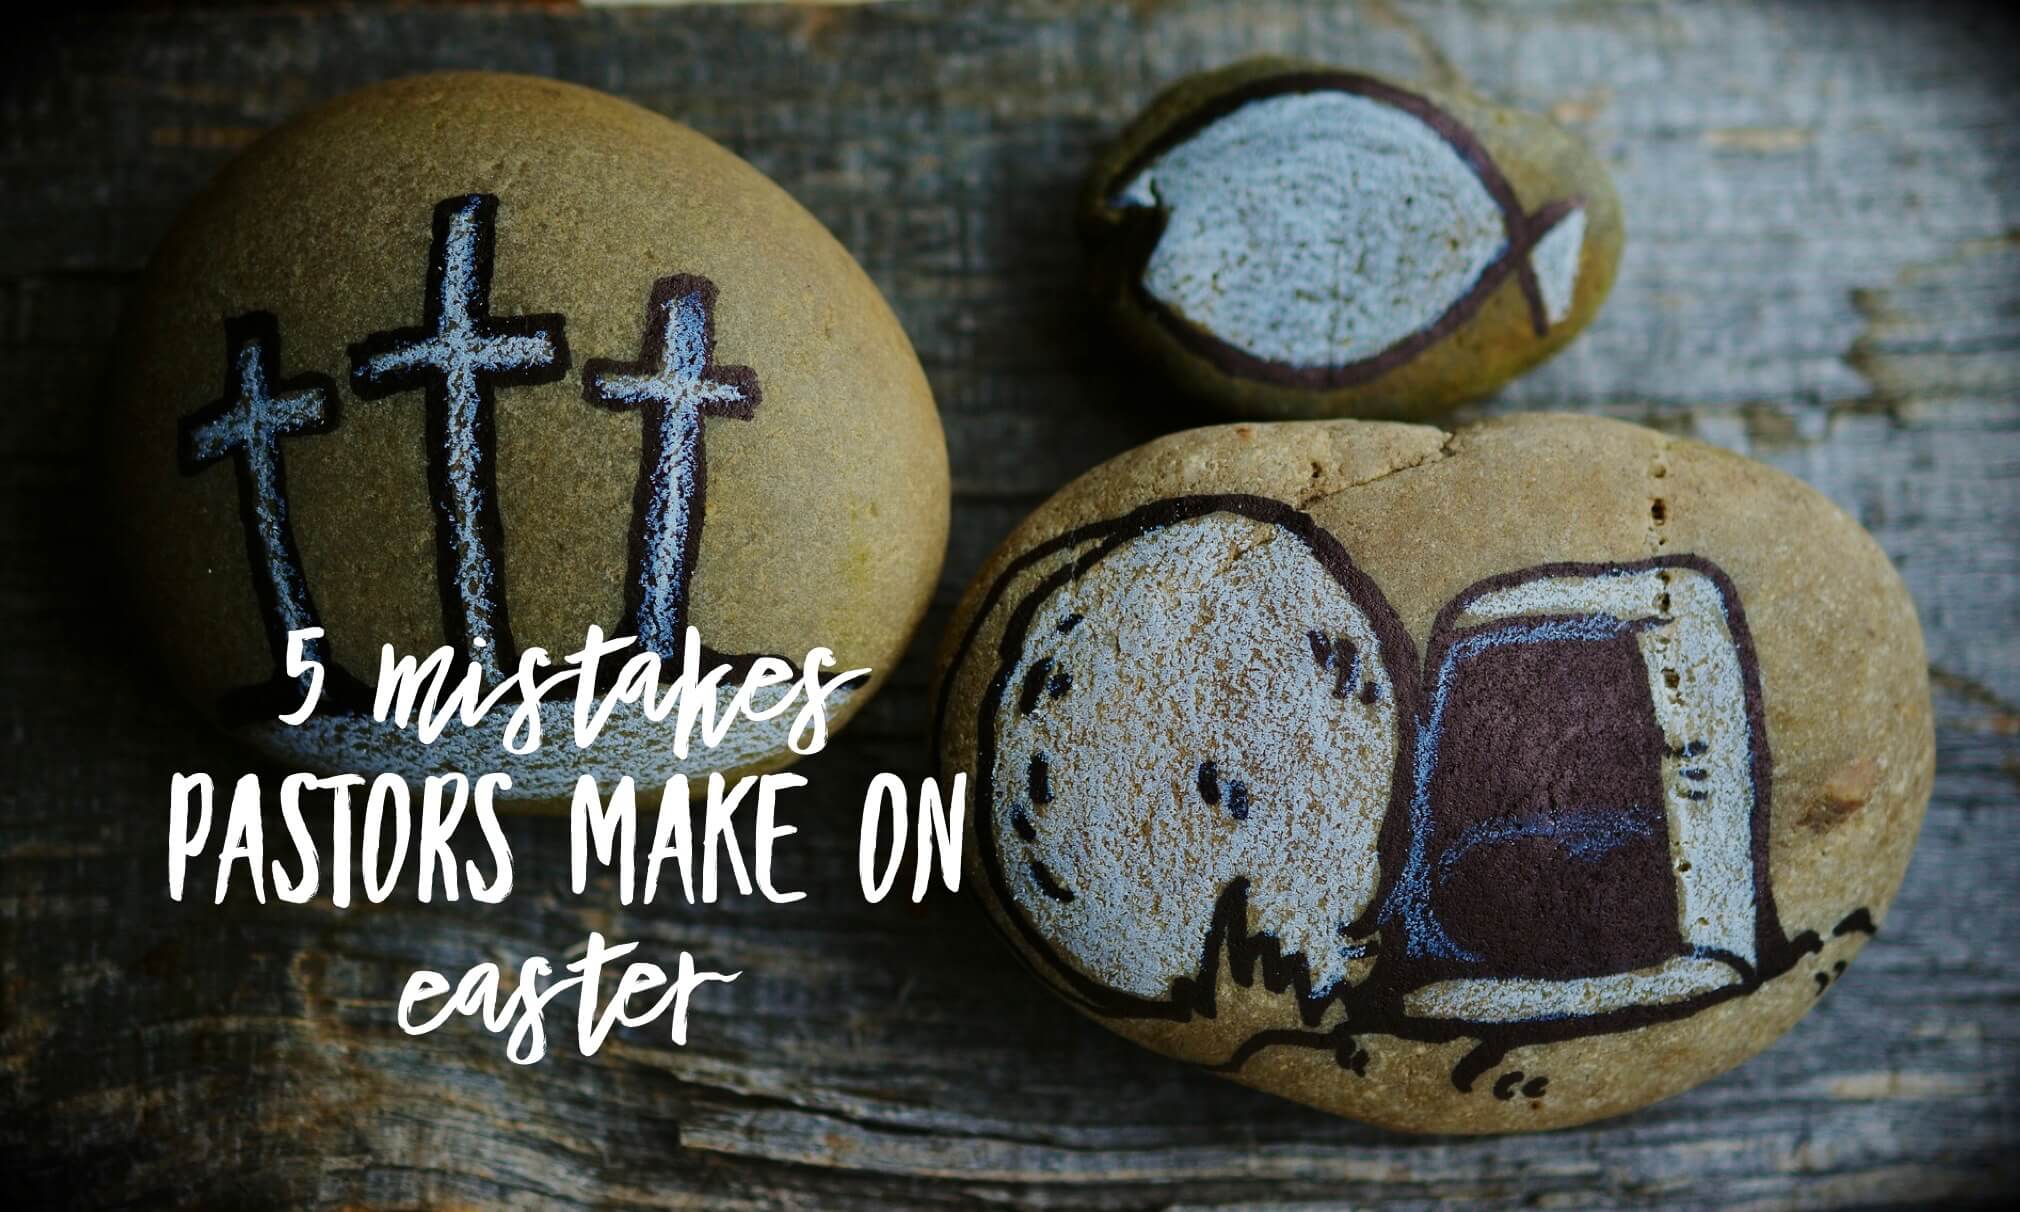 5 Mistakes Pastors Make on Easter